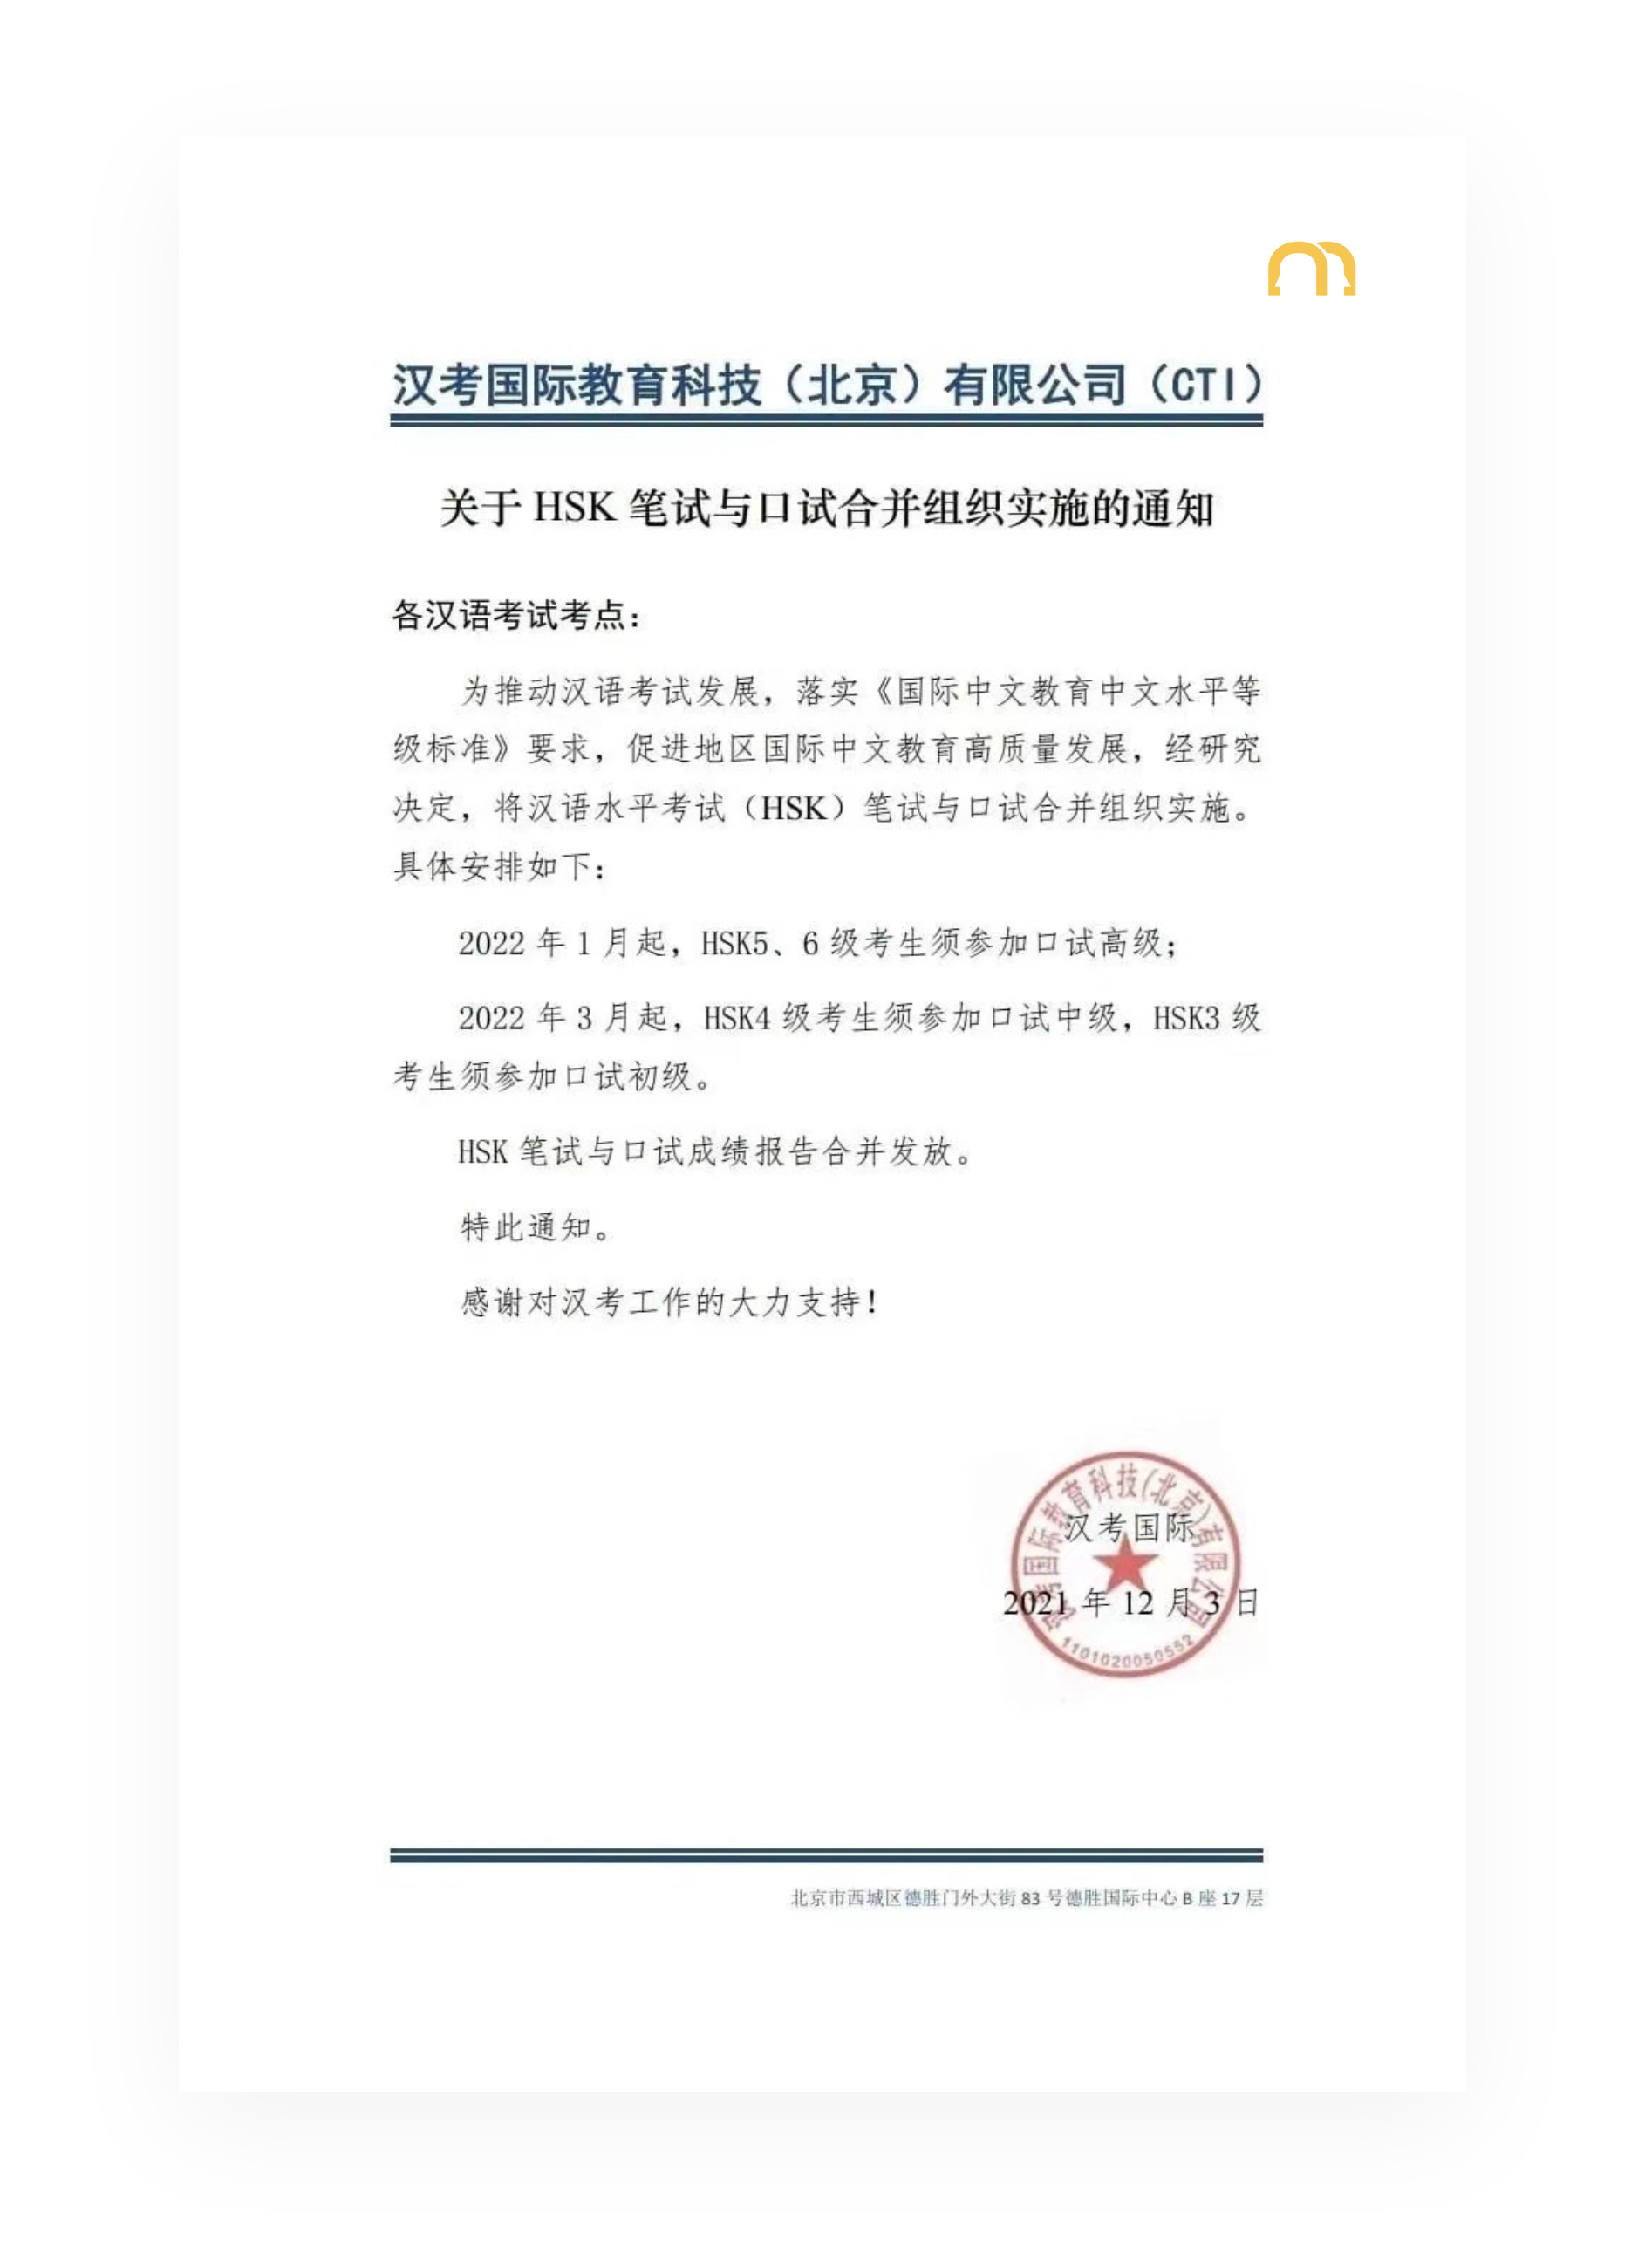 2022 Notice on Merging the Spoken and Written HSK